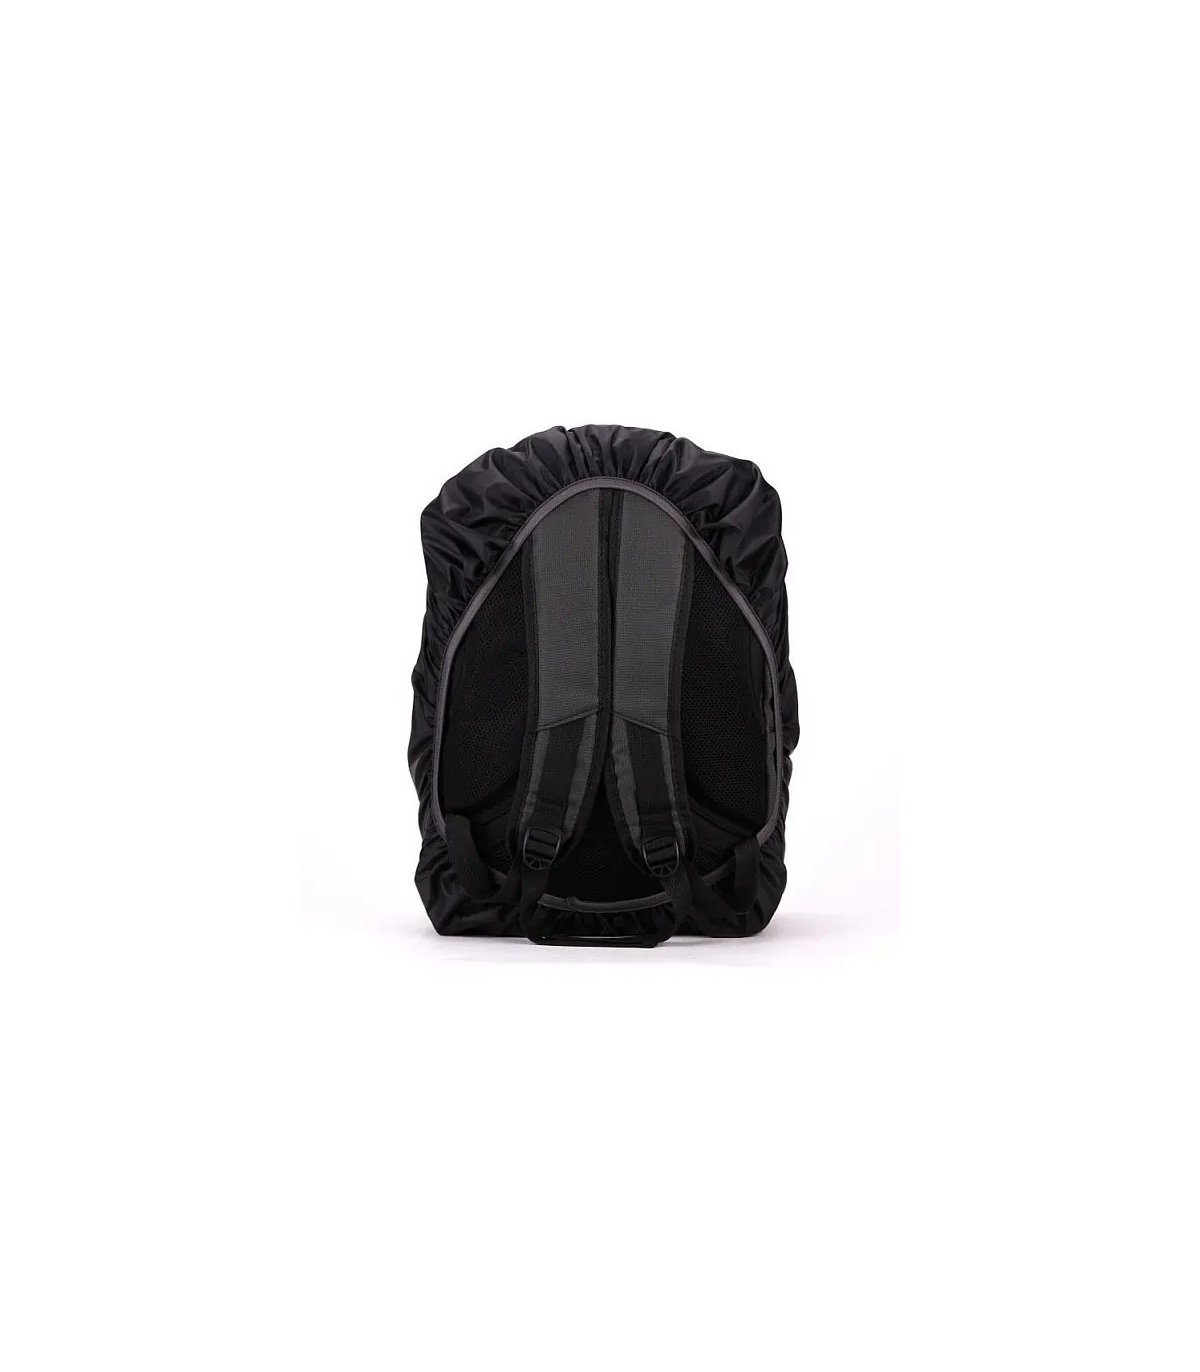 Chill Stealth Anti-Theft Backpack